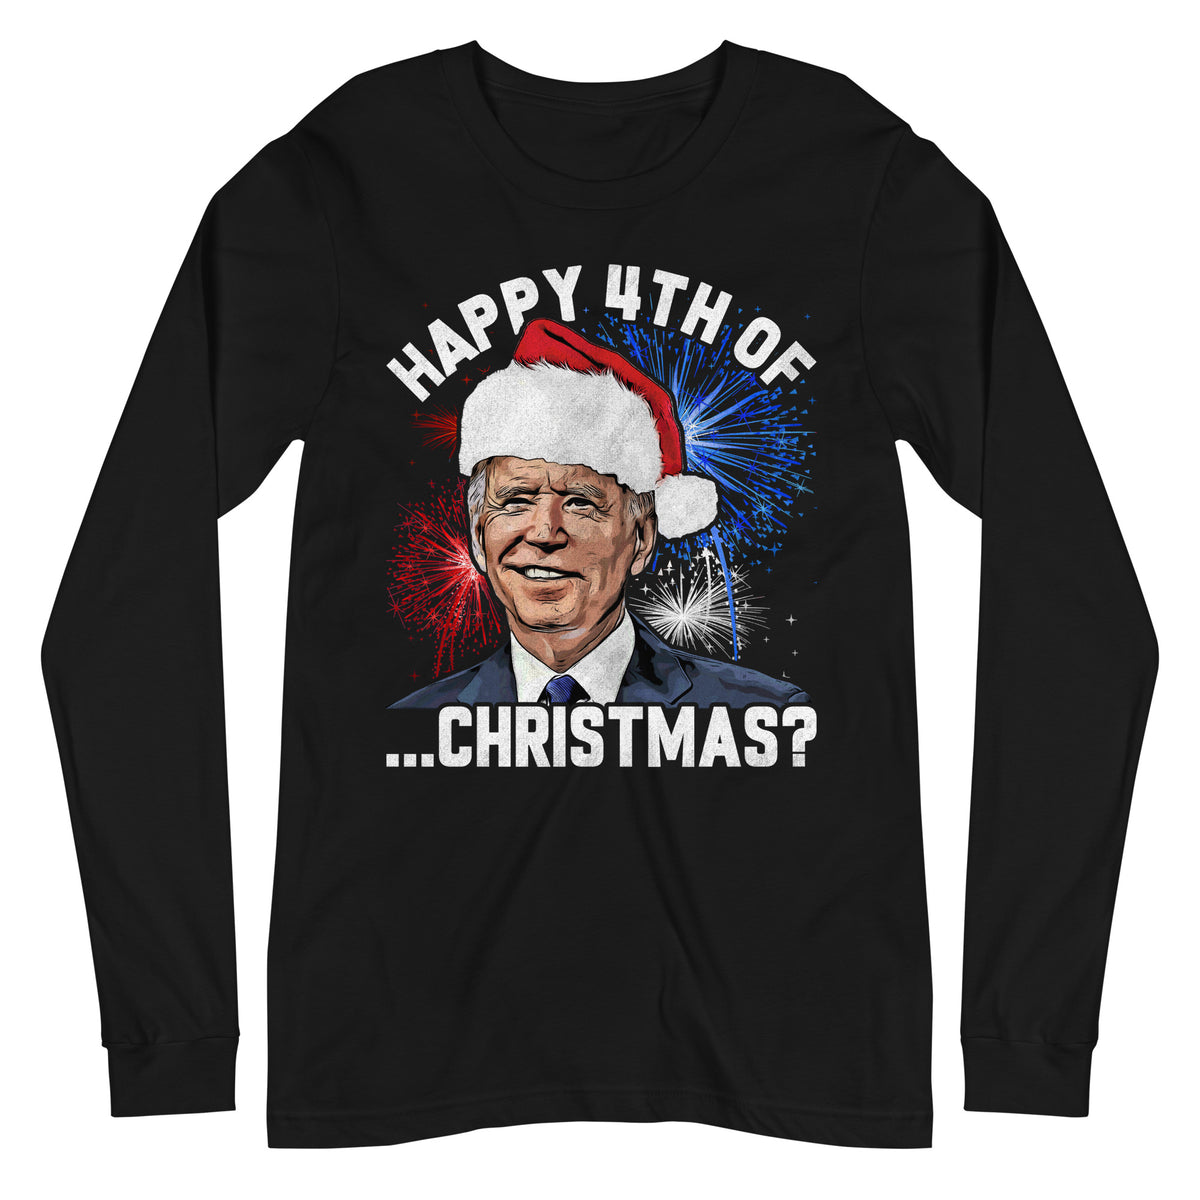 Happy 4th of Christmas Long Sleeve